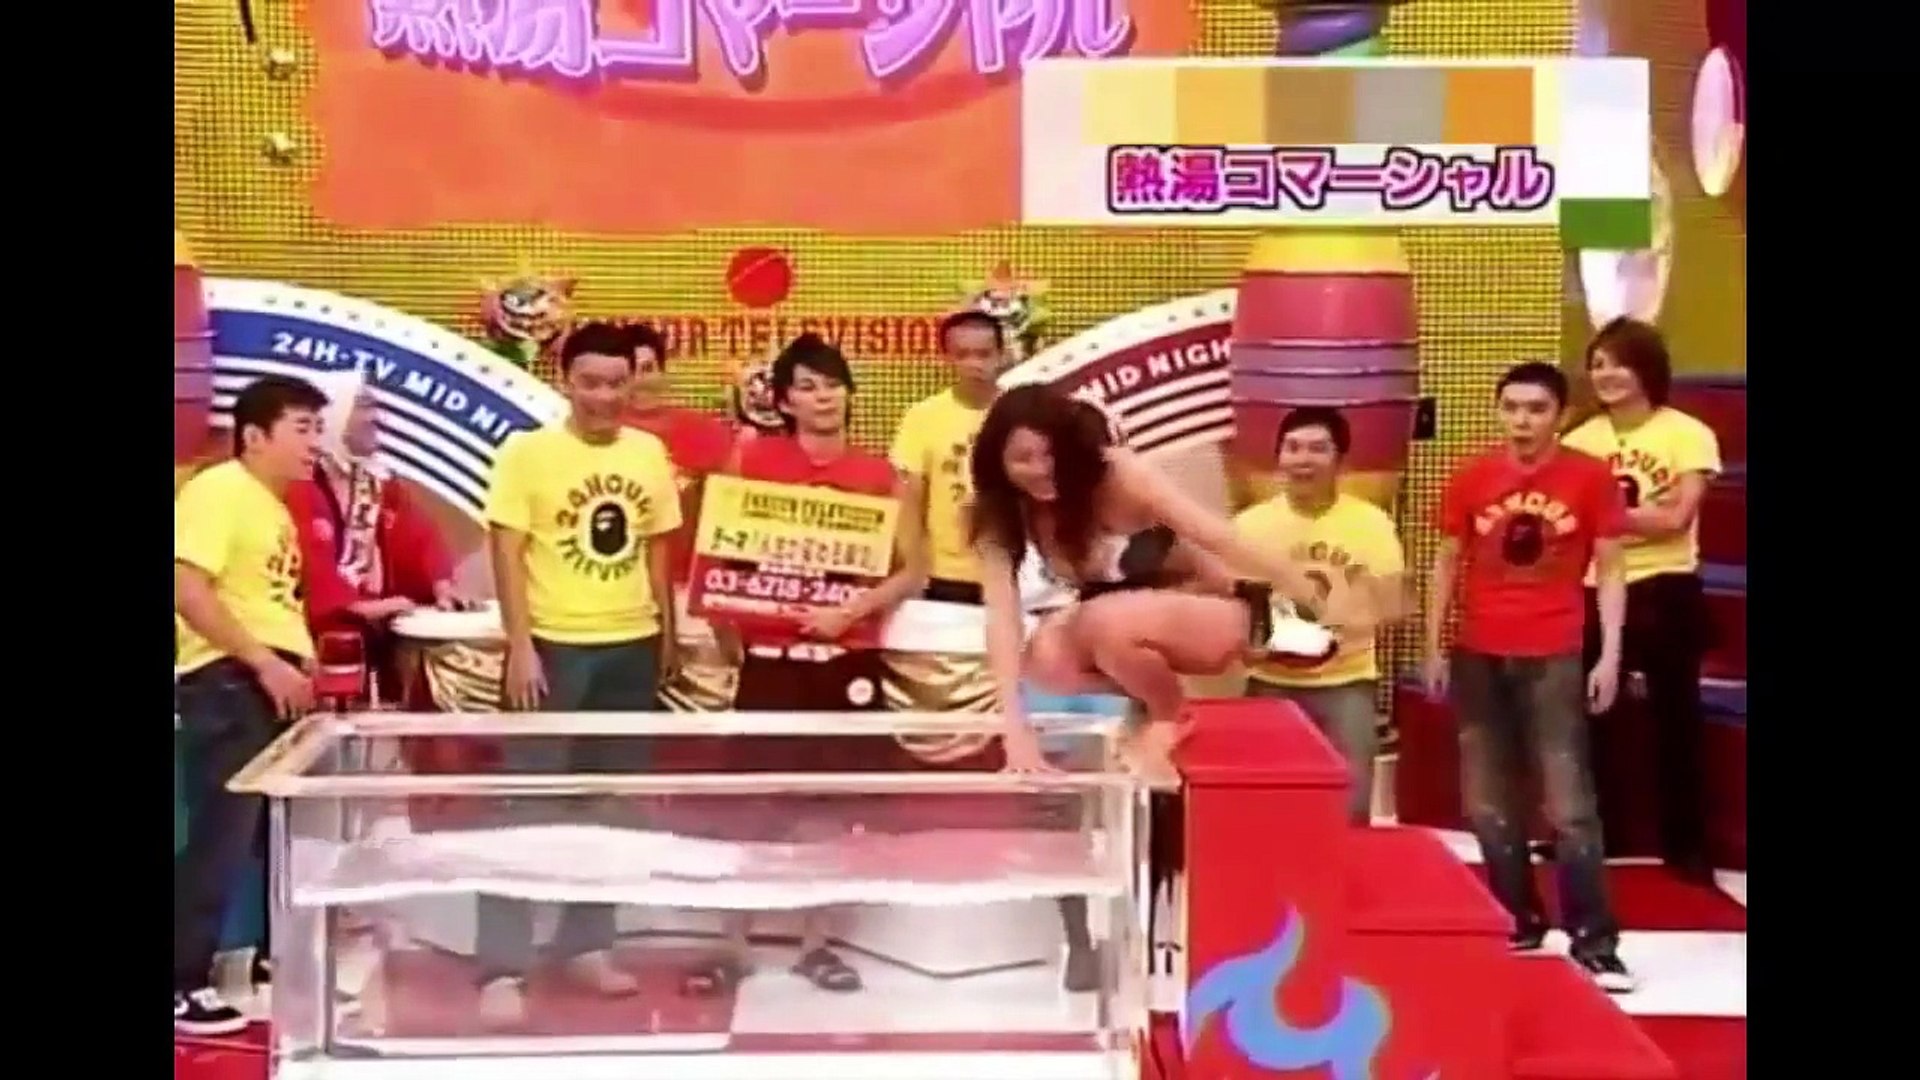 Funny Crazy Weird Japanese Hot Game Show - Boiling Bath Water Challenge..  Hilarious LOL.. - video Dailymotion